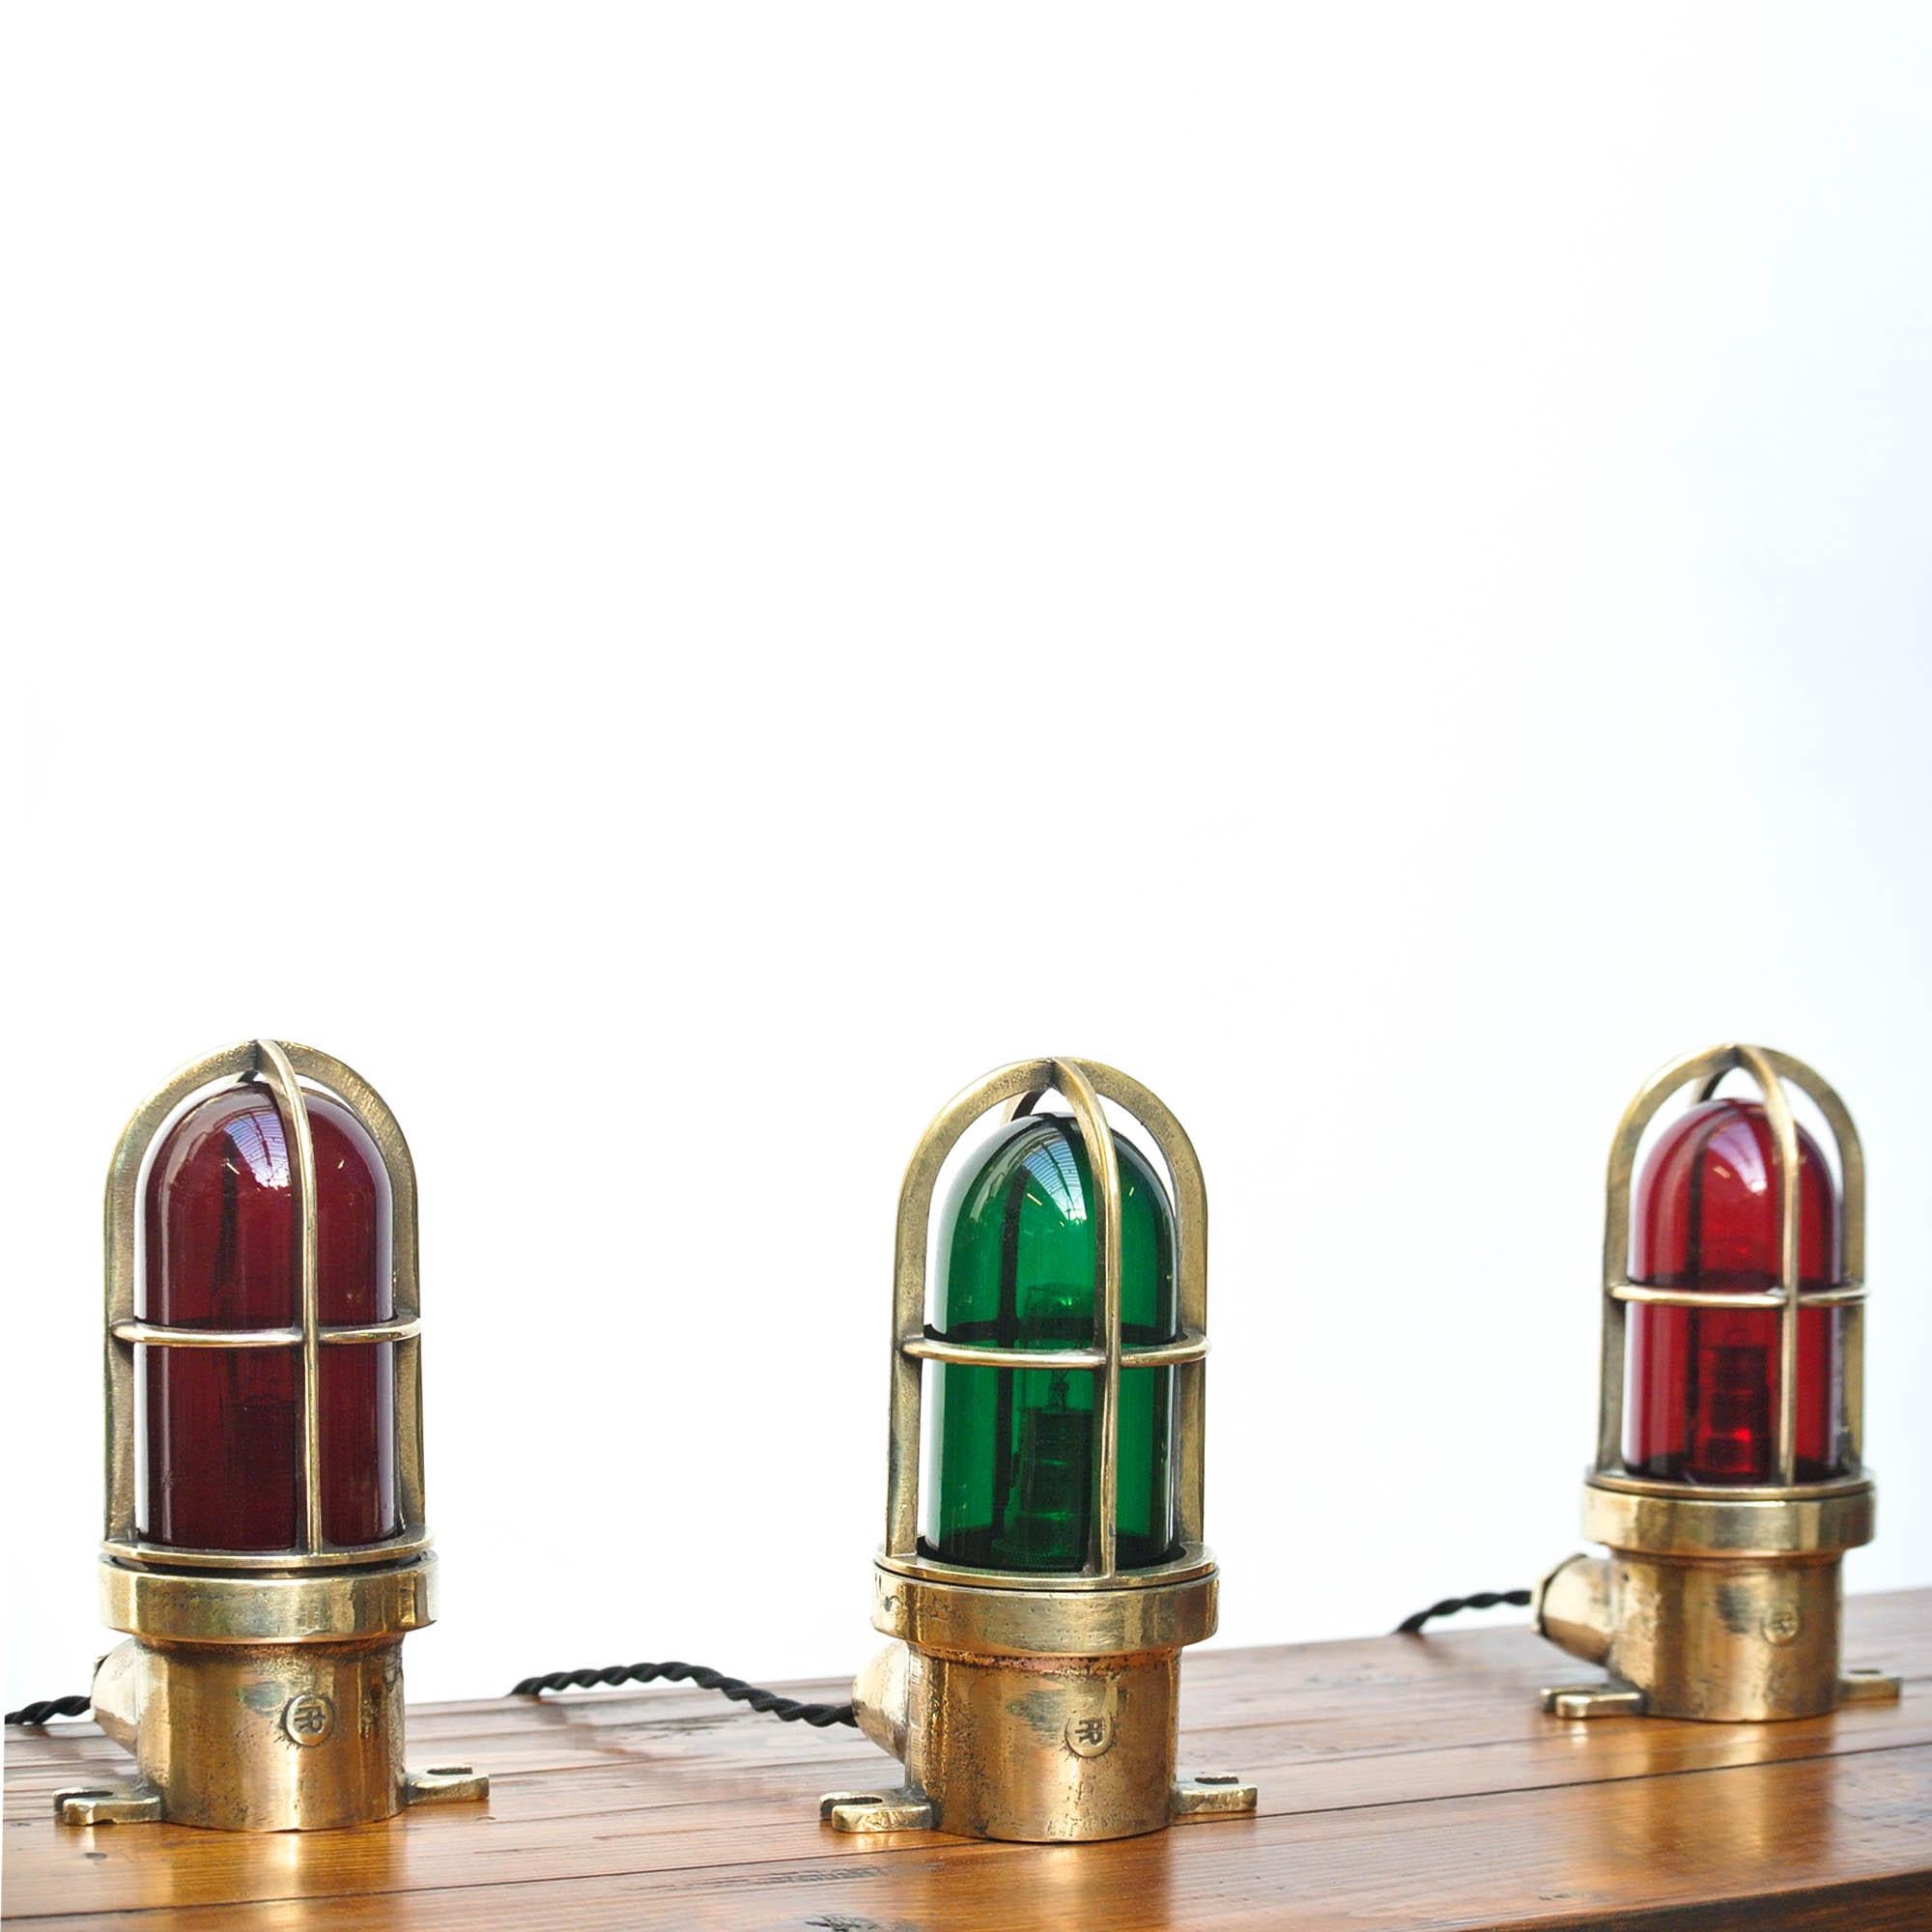 Mid-20th Century Set of 3 Small Signal Lamp in Brass and Colored Glass, France, circa 1950-1959